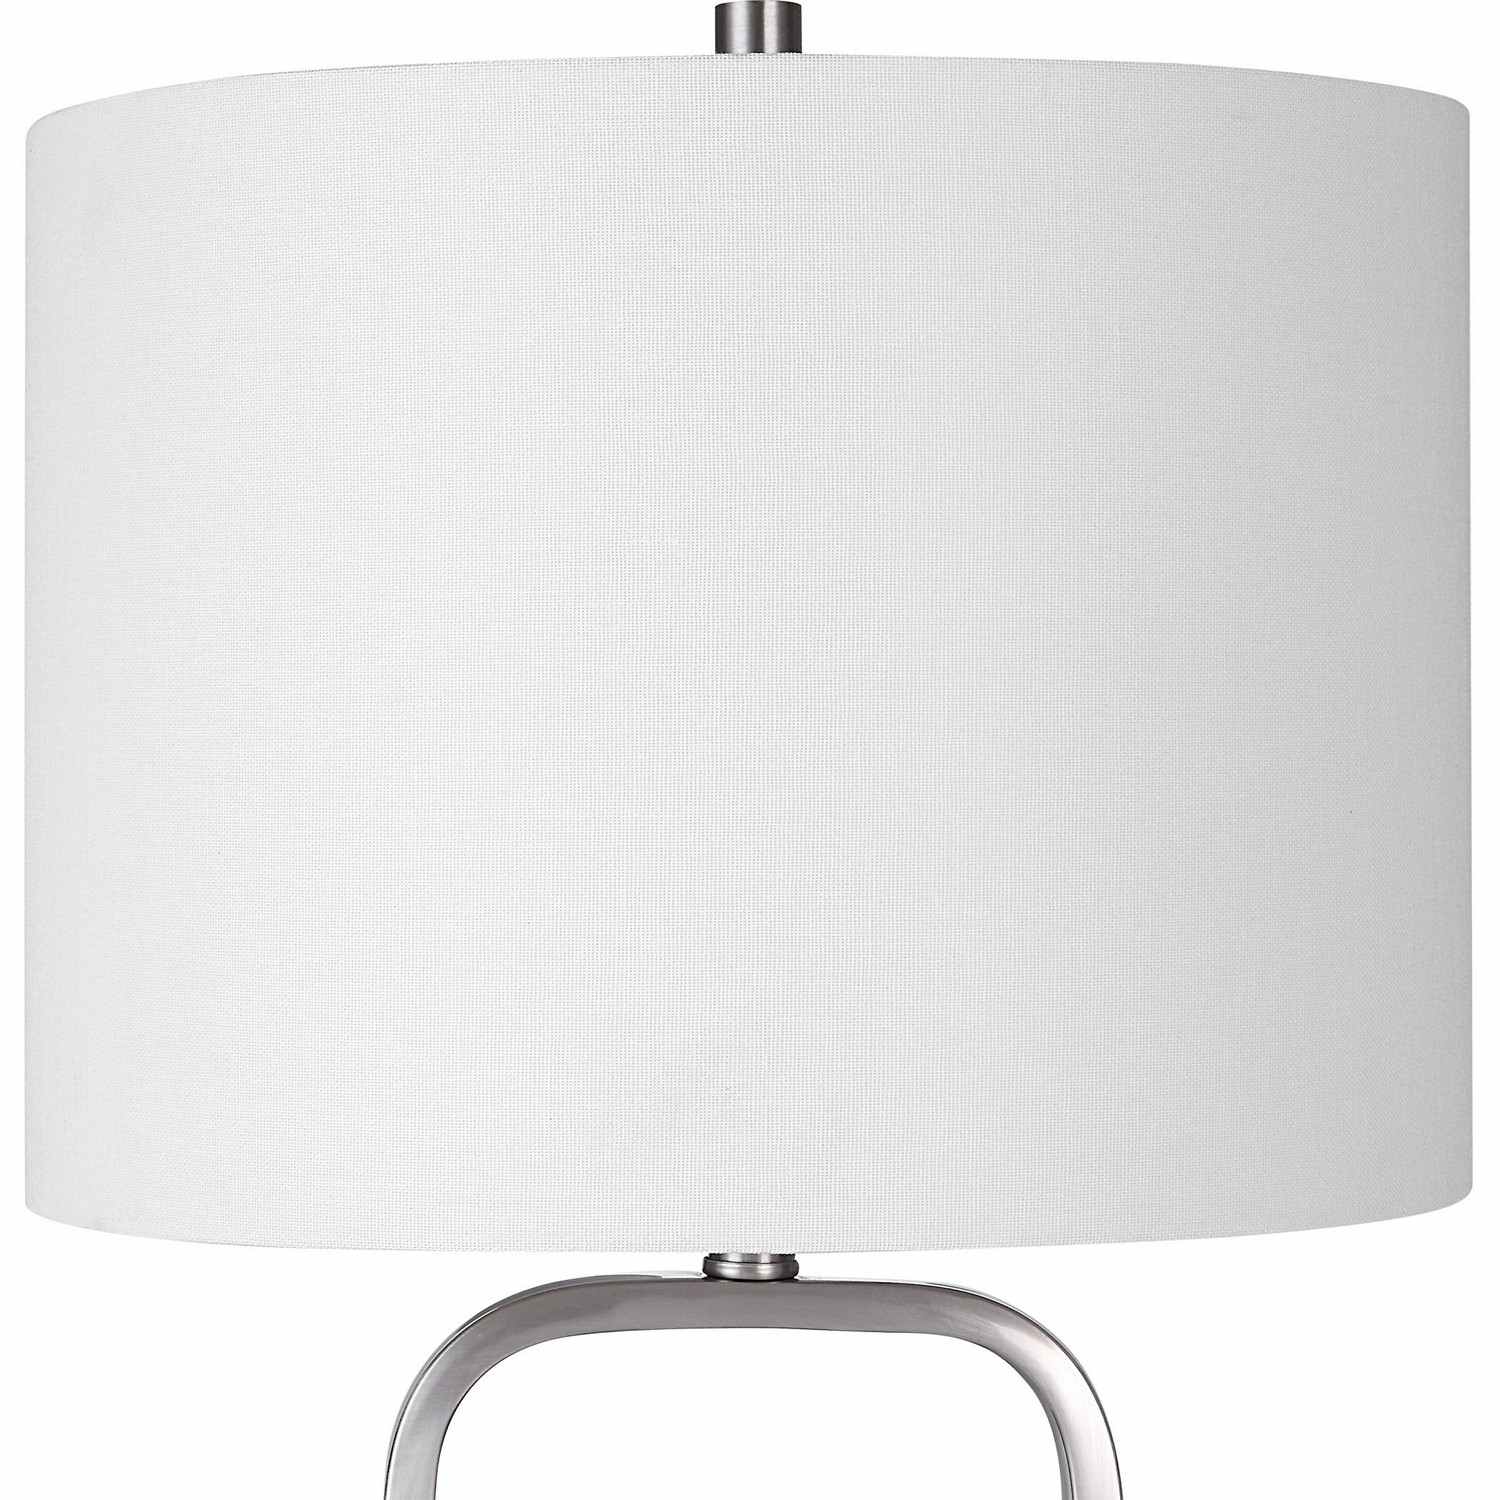 ABC Accent ABC-26084-1 Table Lamp - Brushed Nickel